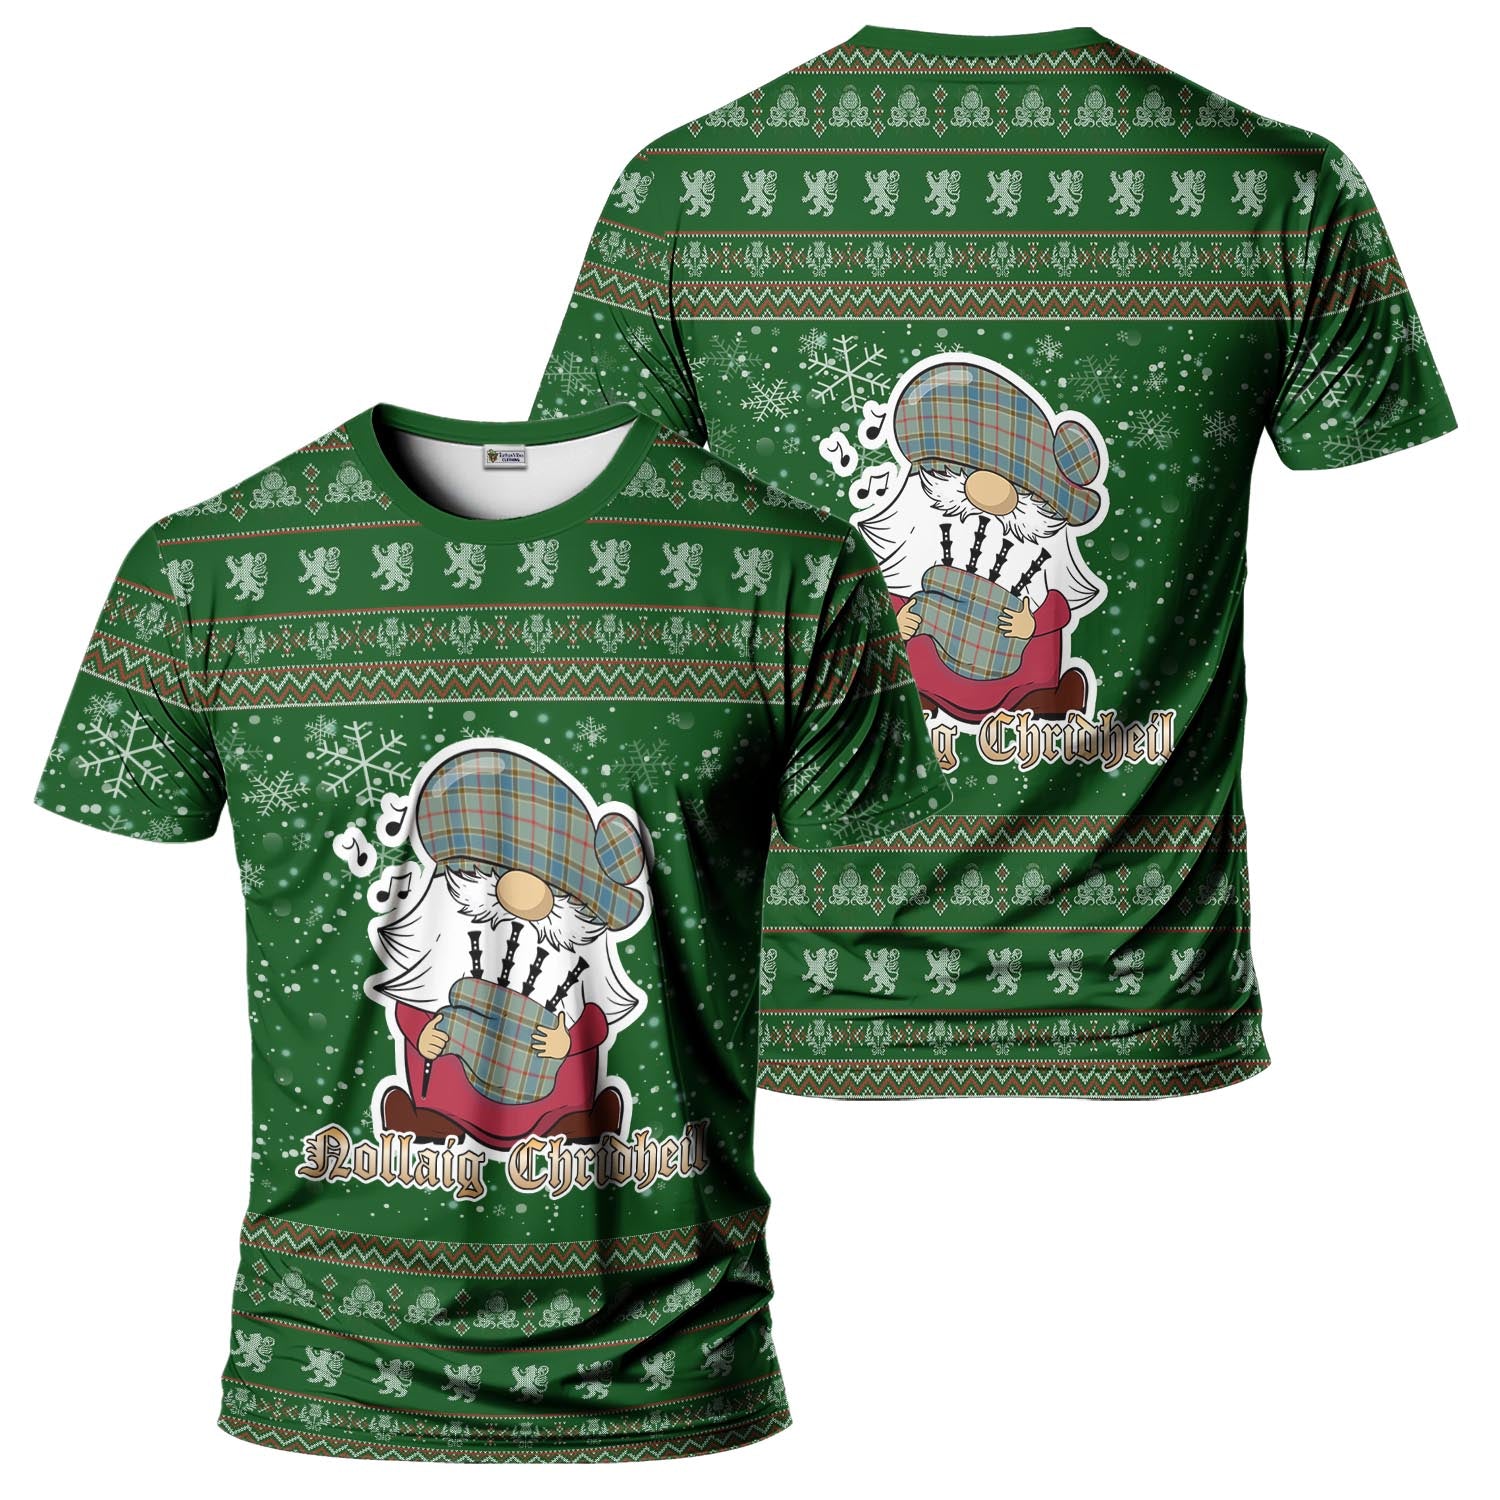 Balfour Blue Clan Christmas Family T-Shirt with Funny Gnome Playing Bagpipes Men's Shirt Green - Tartanvibesclothing